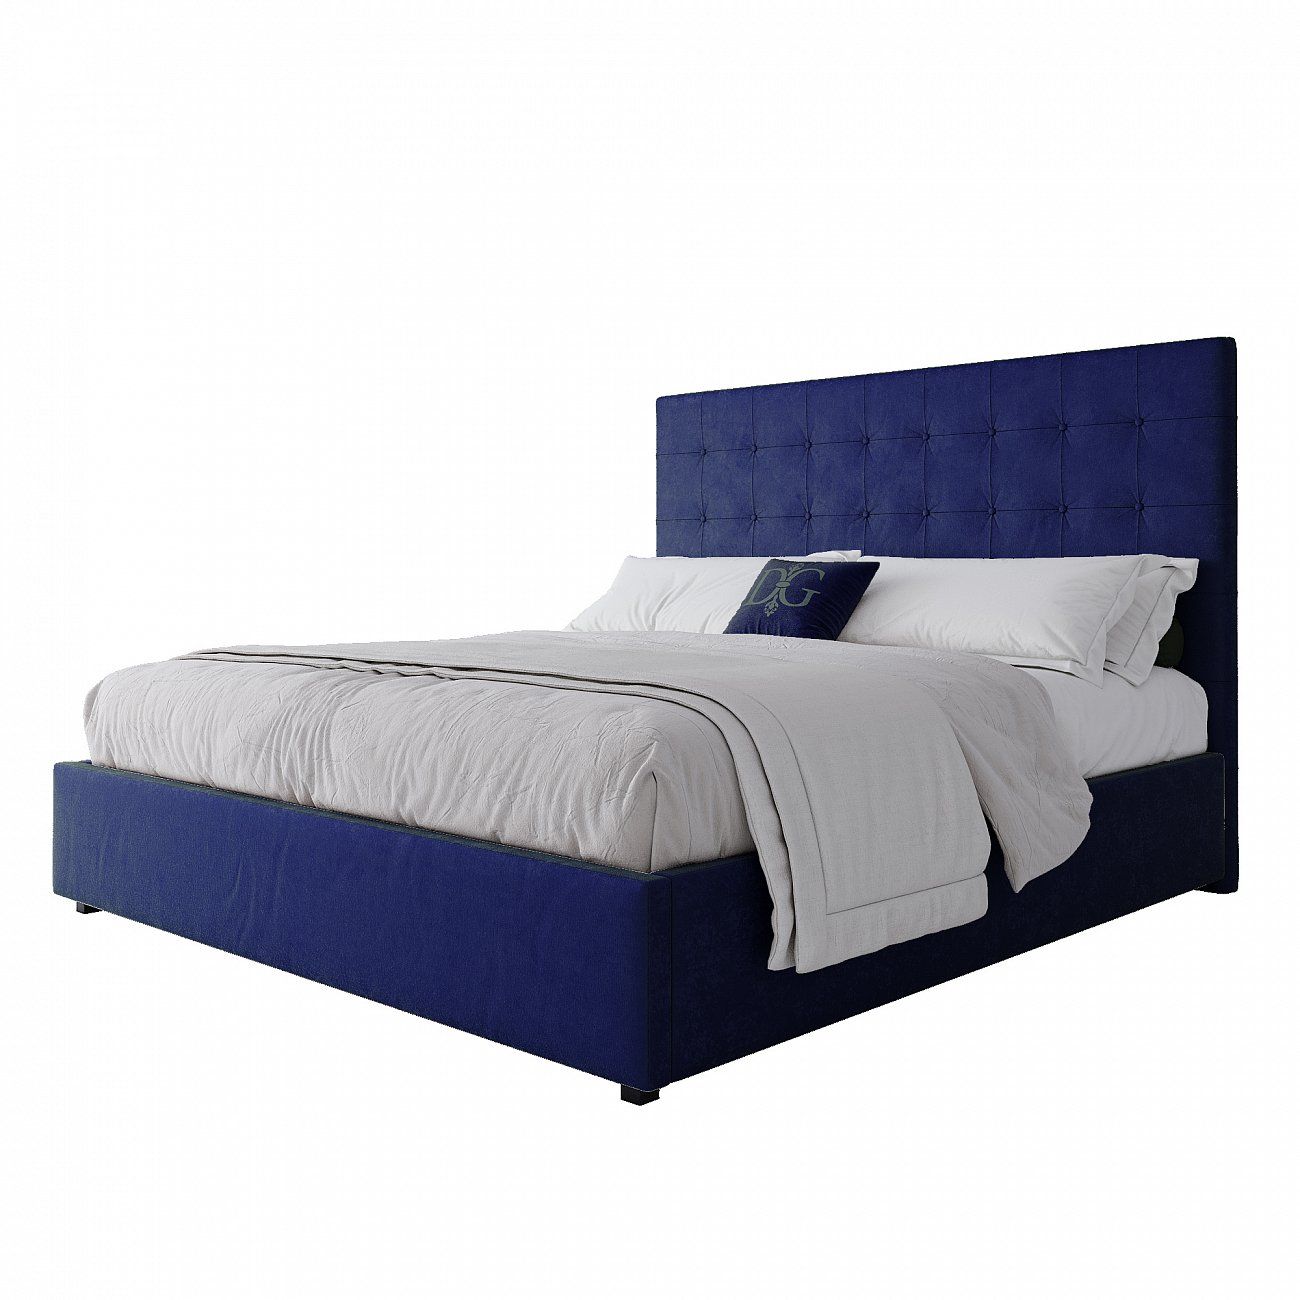 Double bed with upholstered headboard 180x200 cm blue Royal Black